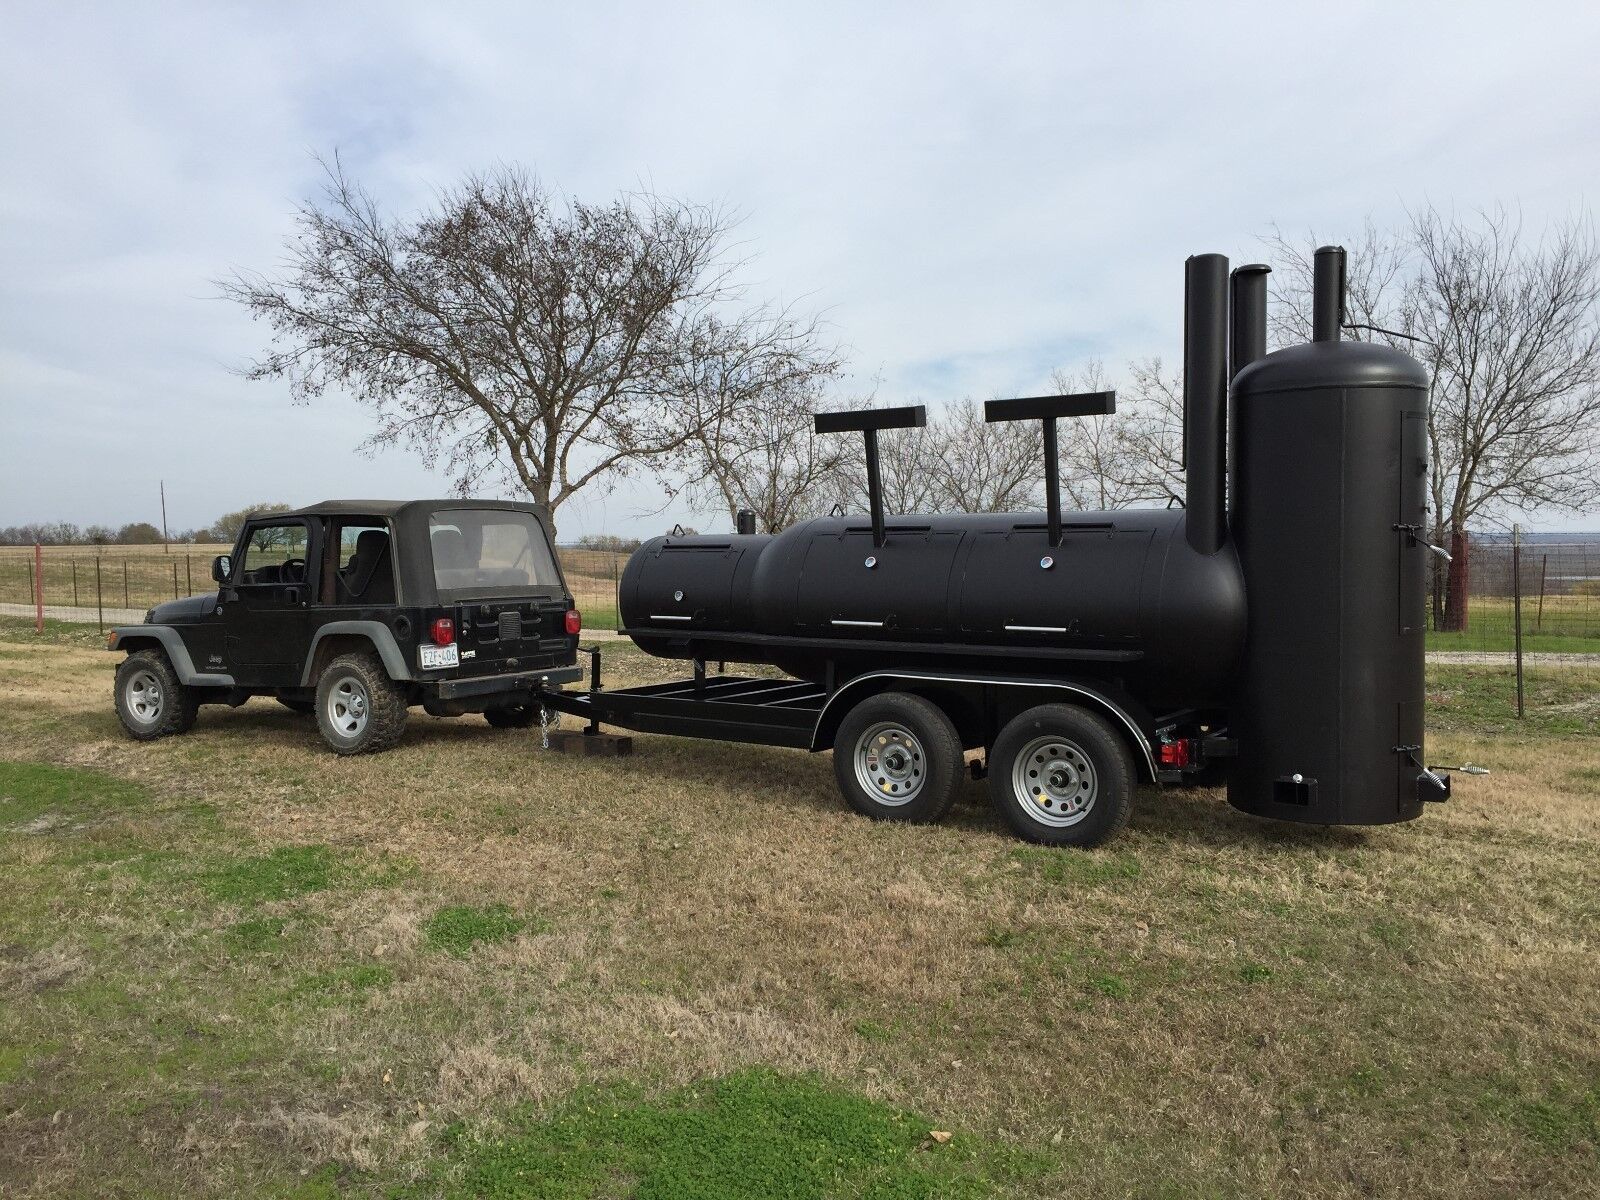 NEW BBQ pit smoker cooker and Charcoal grill trailer 